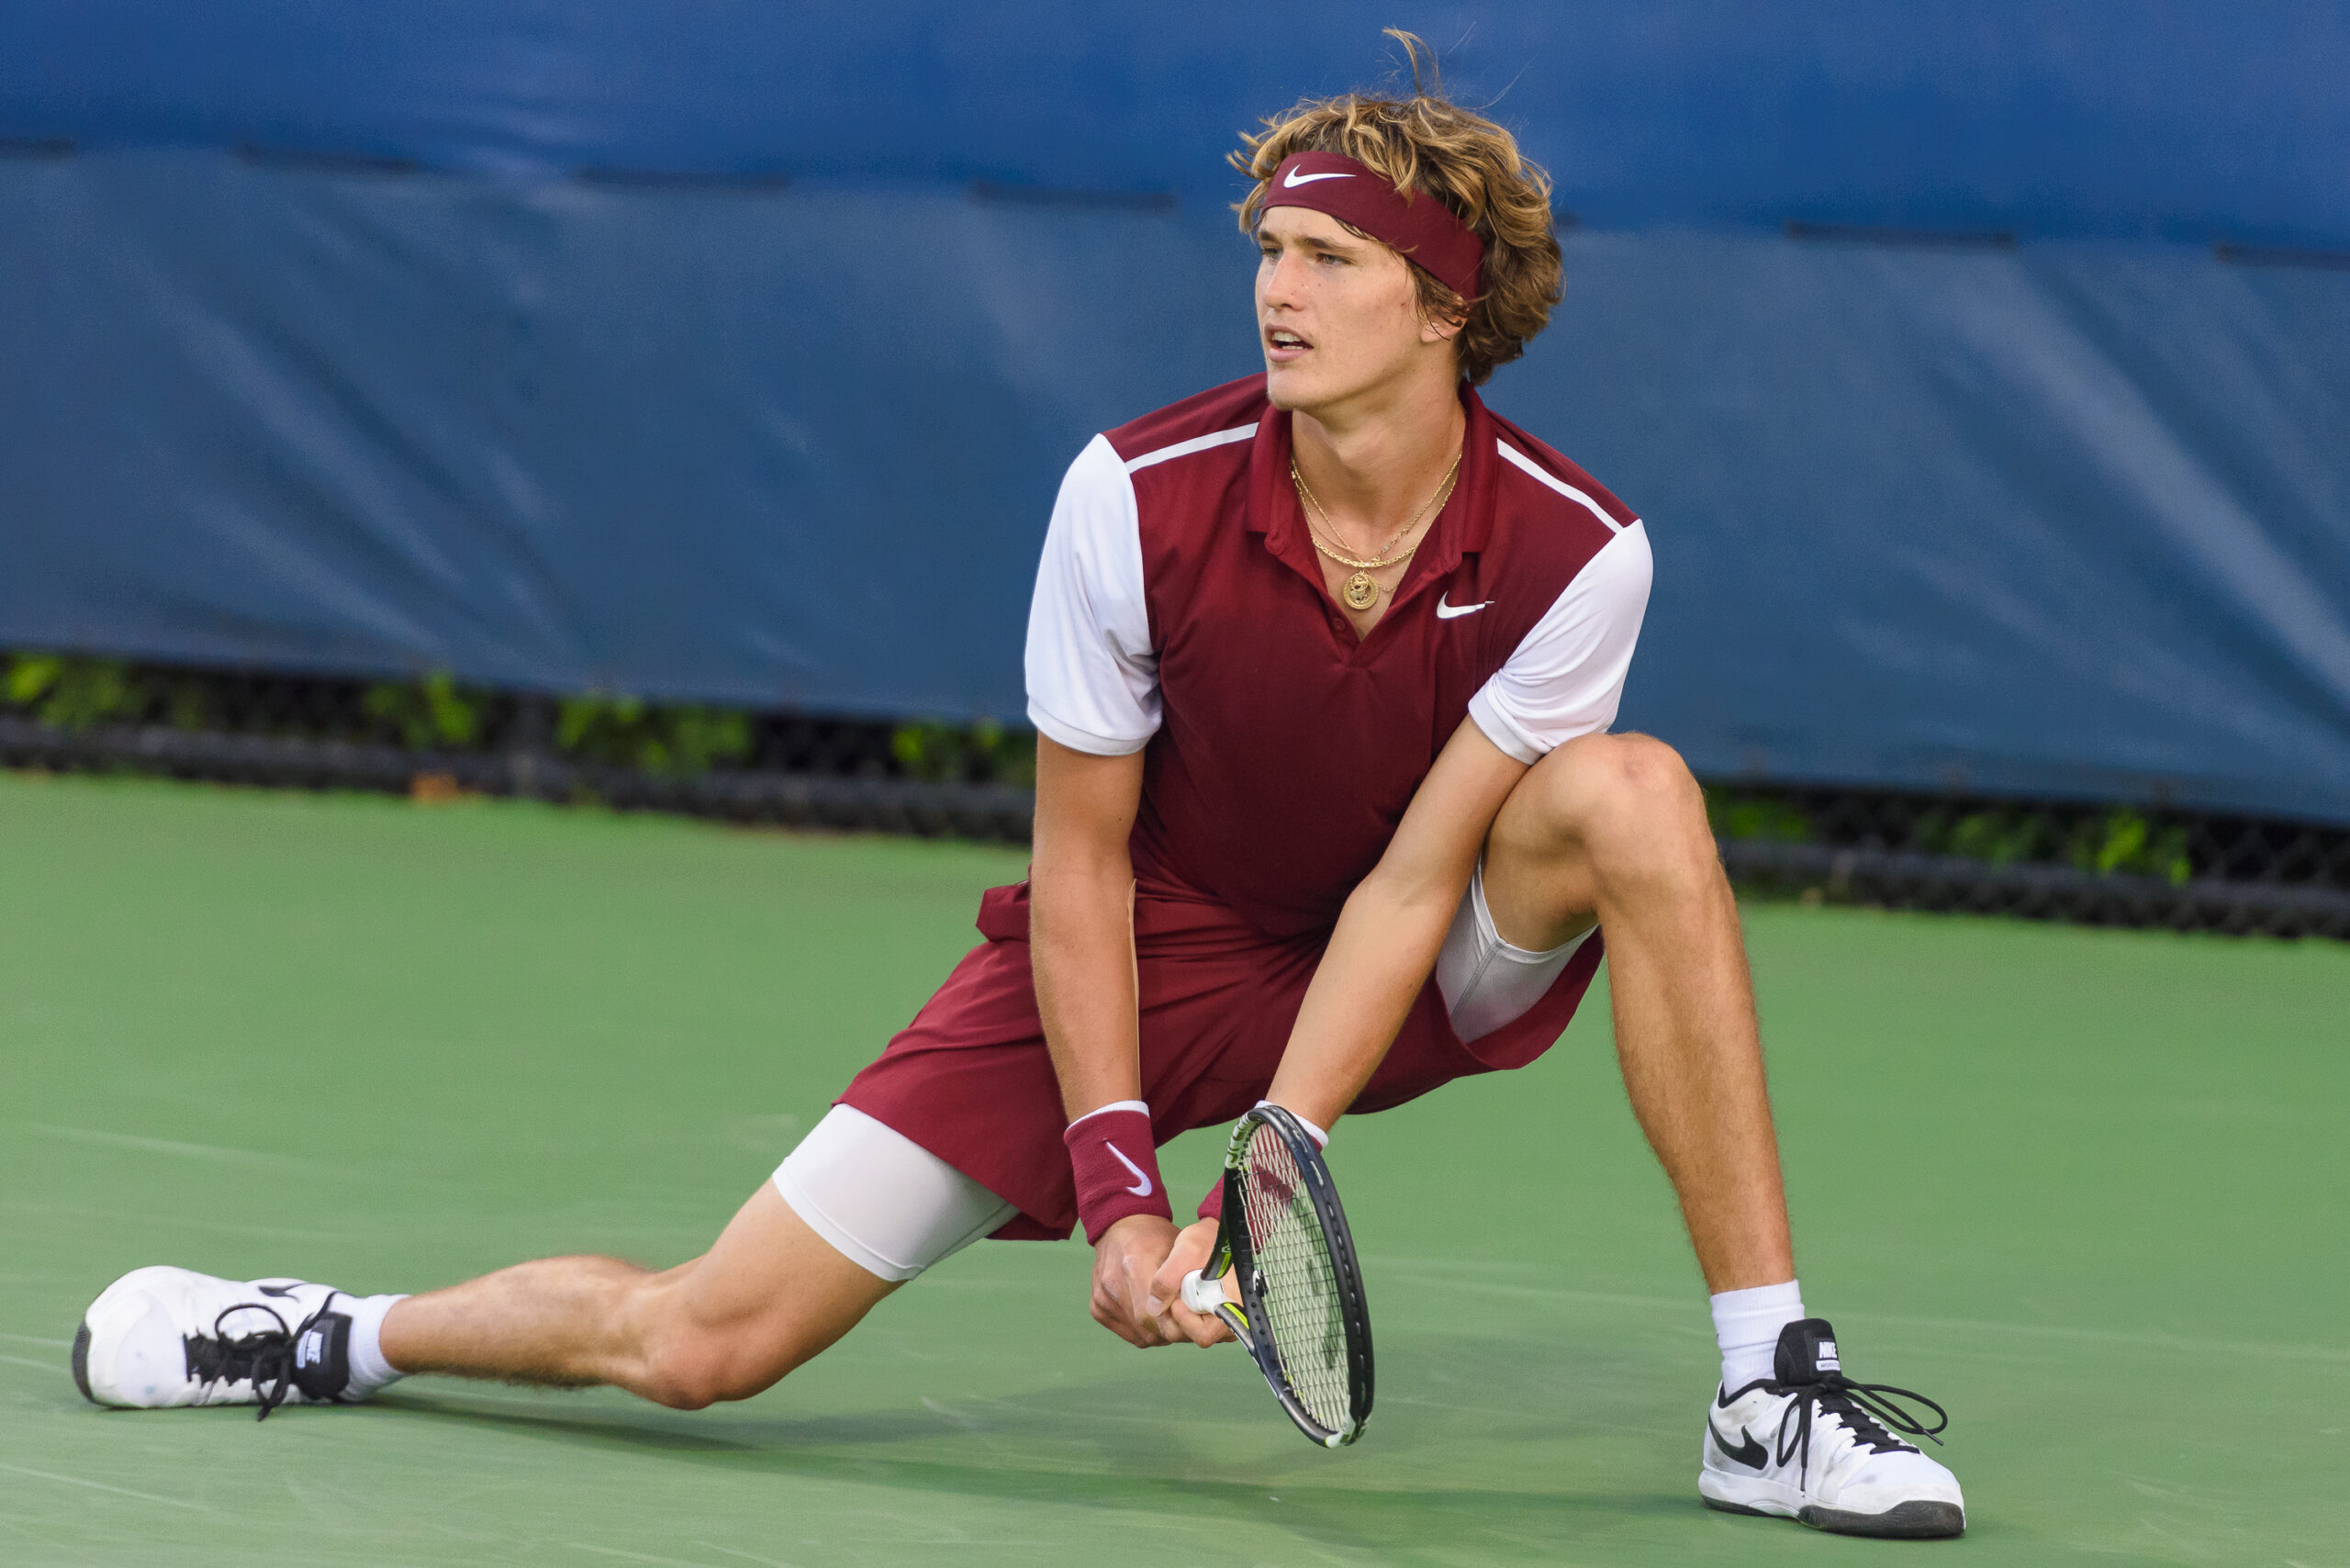 Alexander Zverev out six to eight weeks with several torn ligaments in his ankle